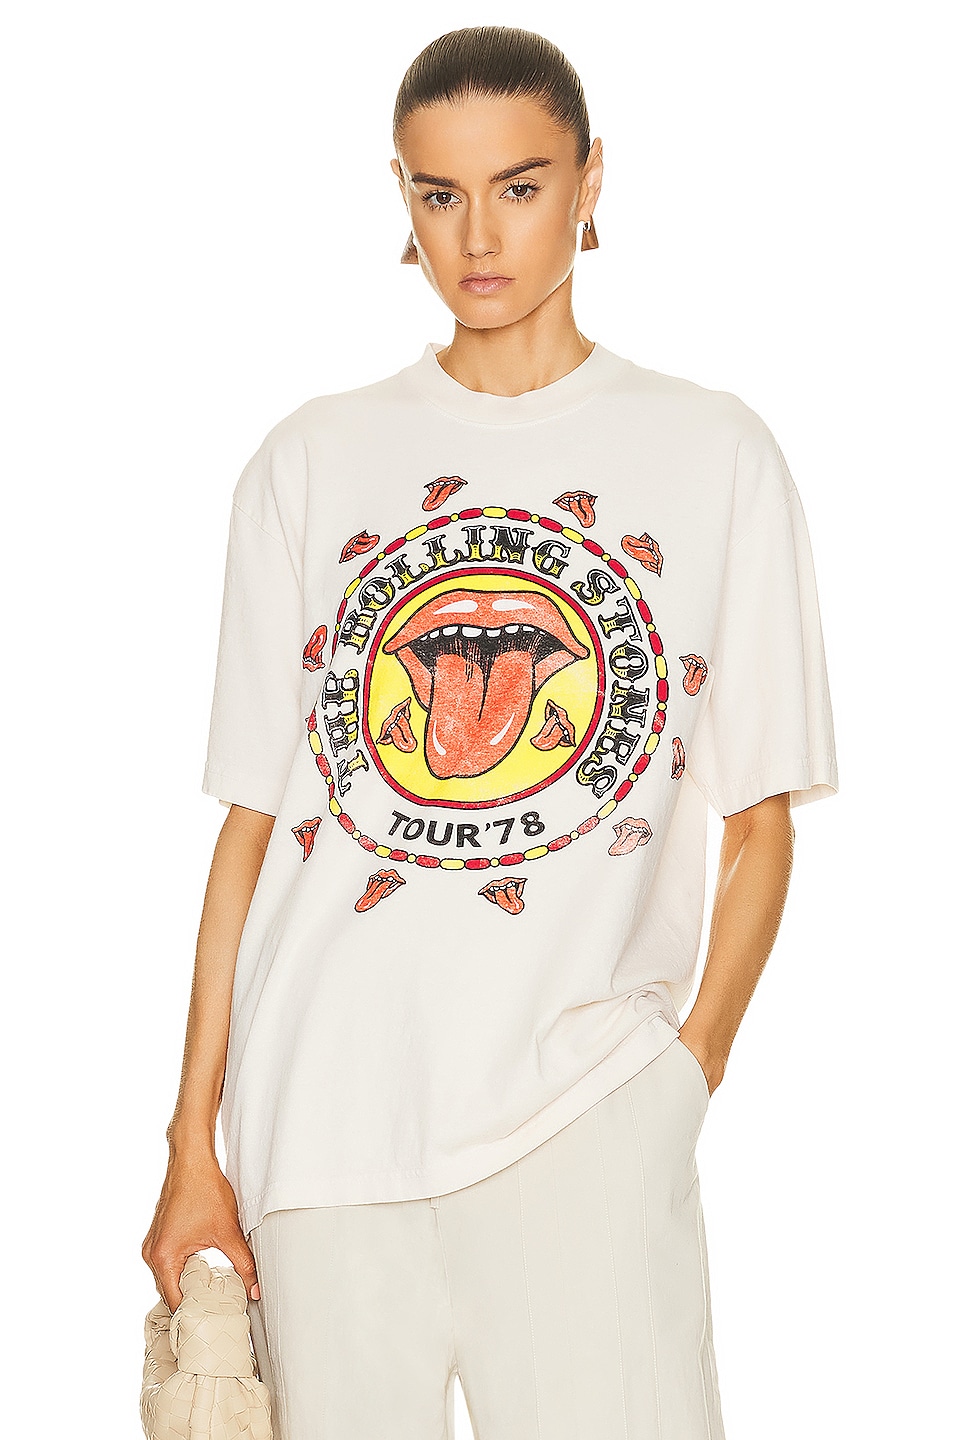 The Rolling Stones Tour T-Shirt in White